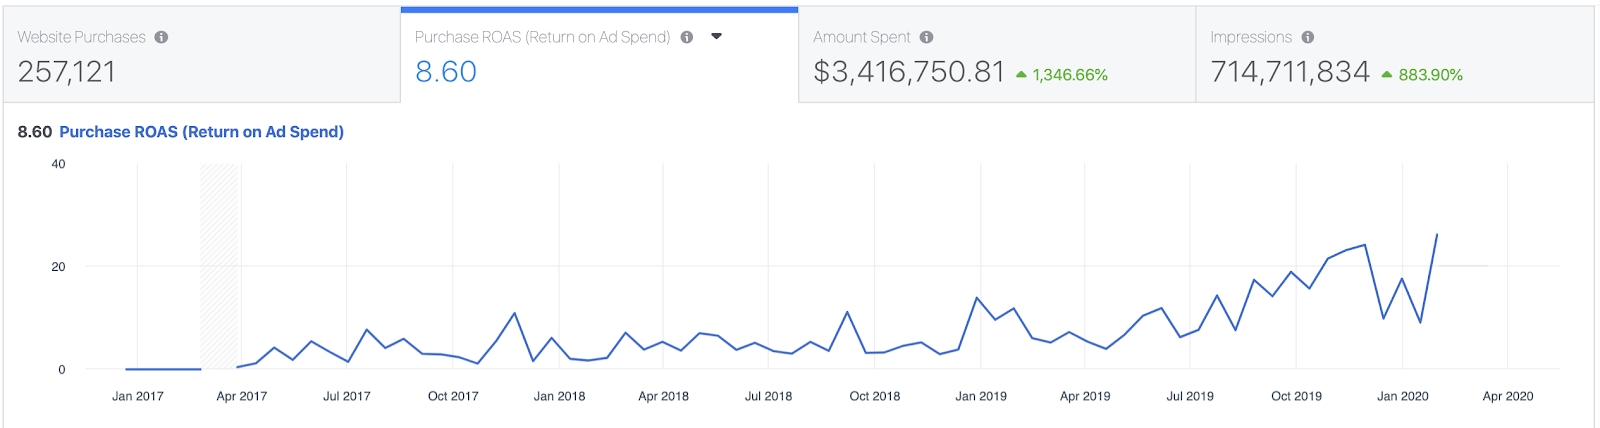 AppSumo ROAS on Facebook ad manager dashboard